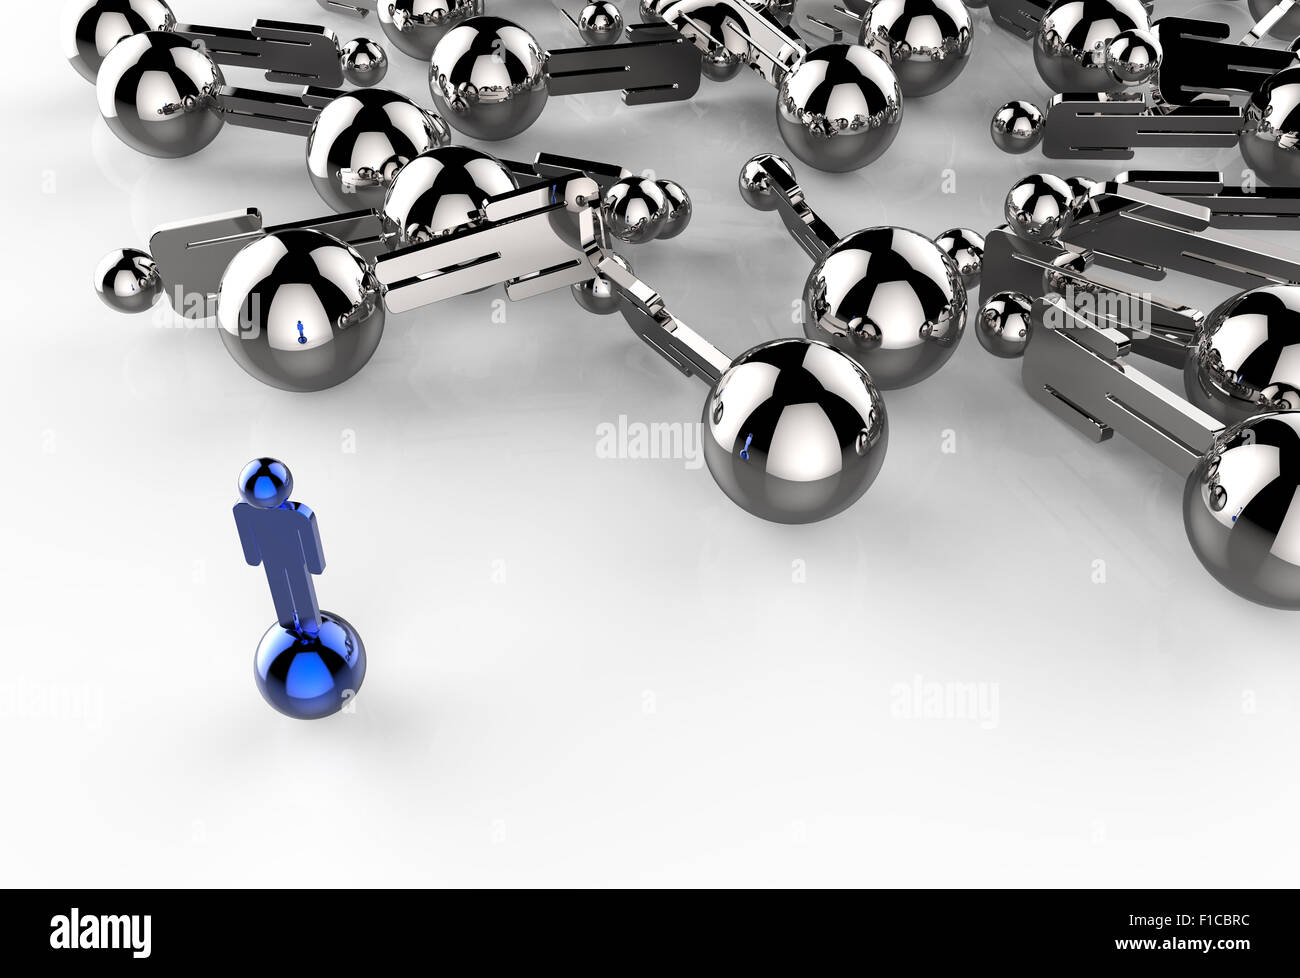 Leader of competition. Concept. 3d illustration Stock Photo